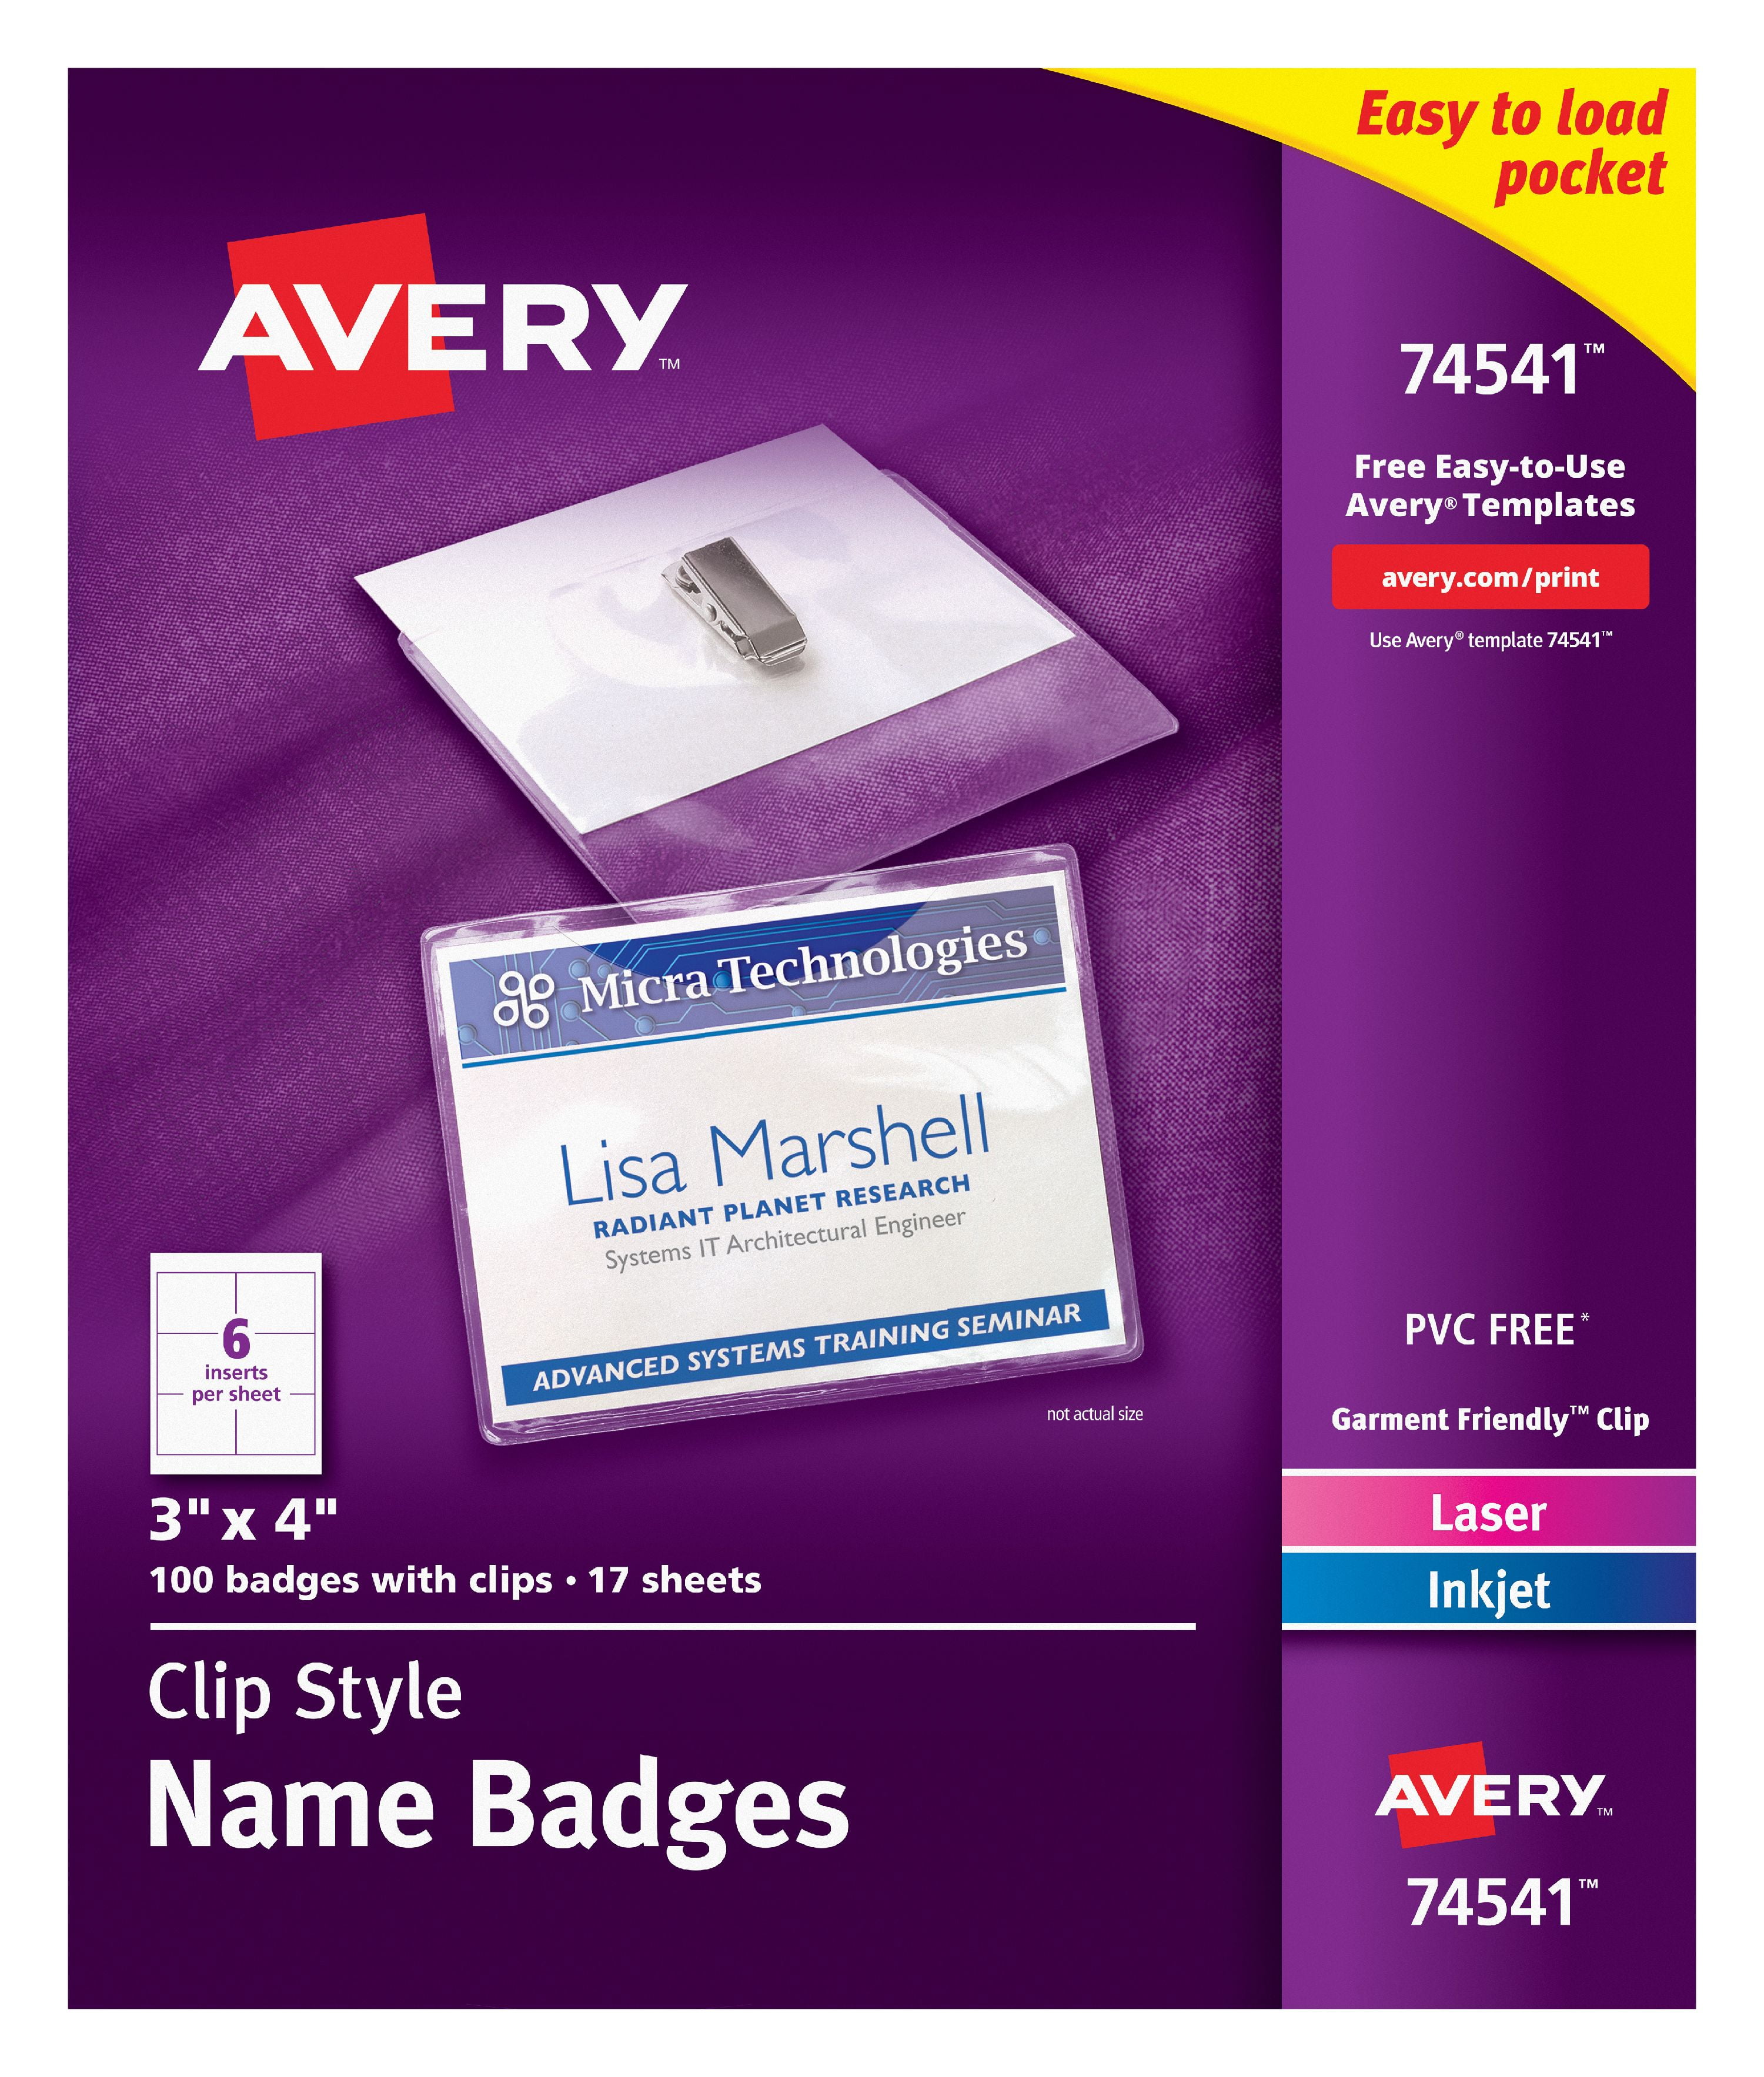 avery-clip-style-name-badges-3-x-4-100-badges-74541-walmart